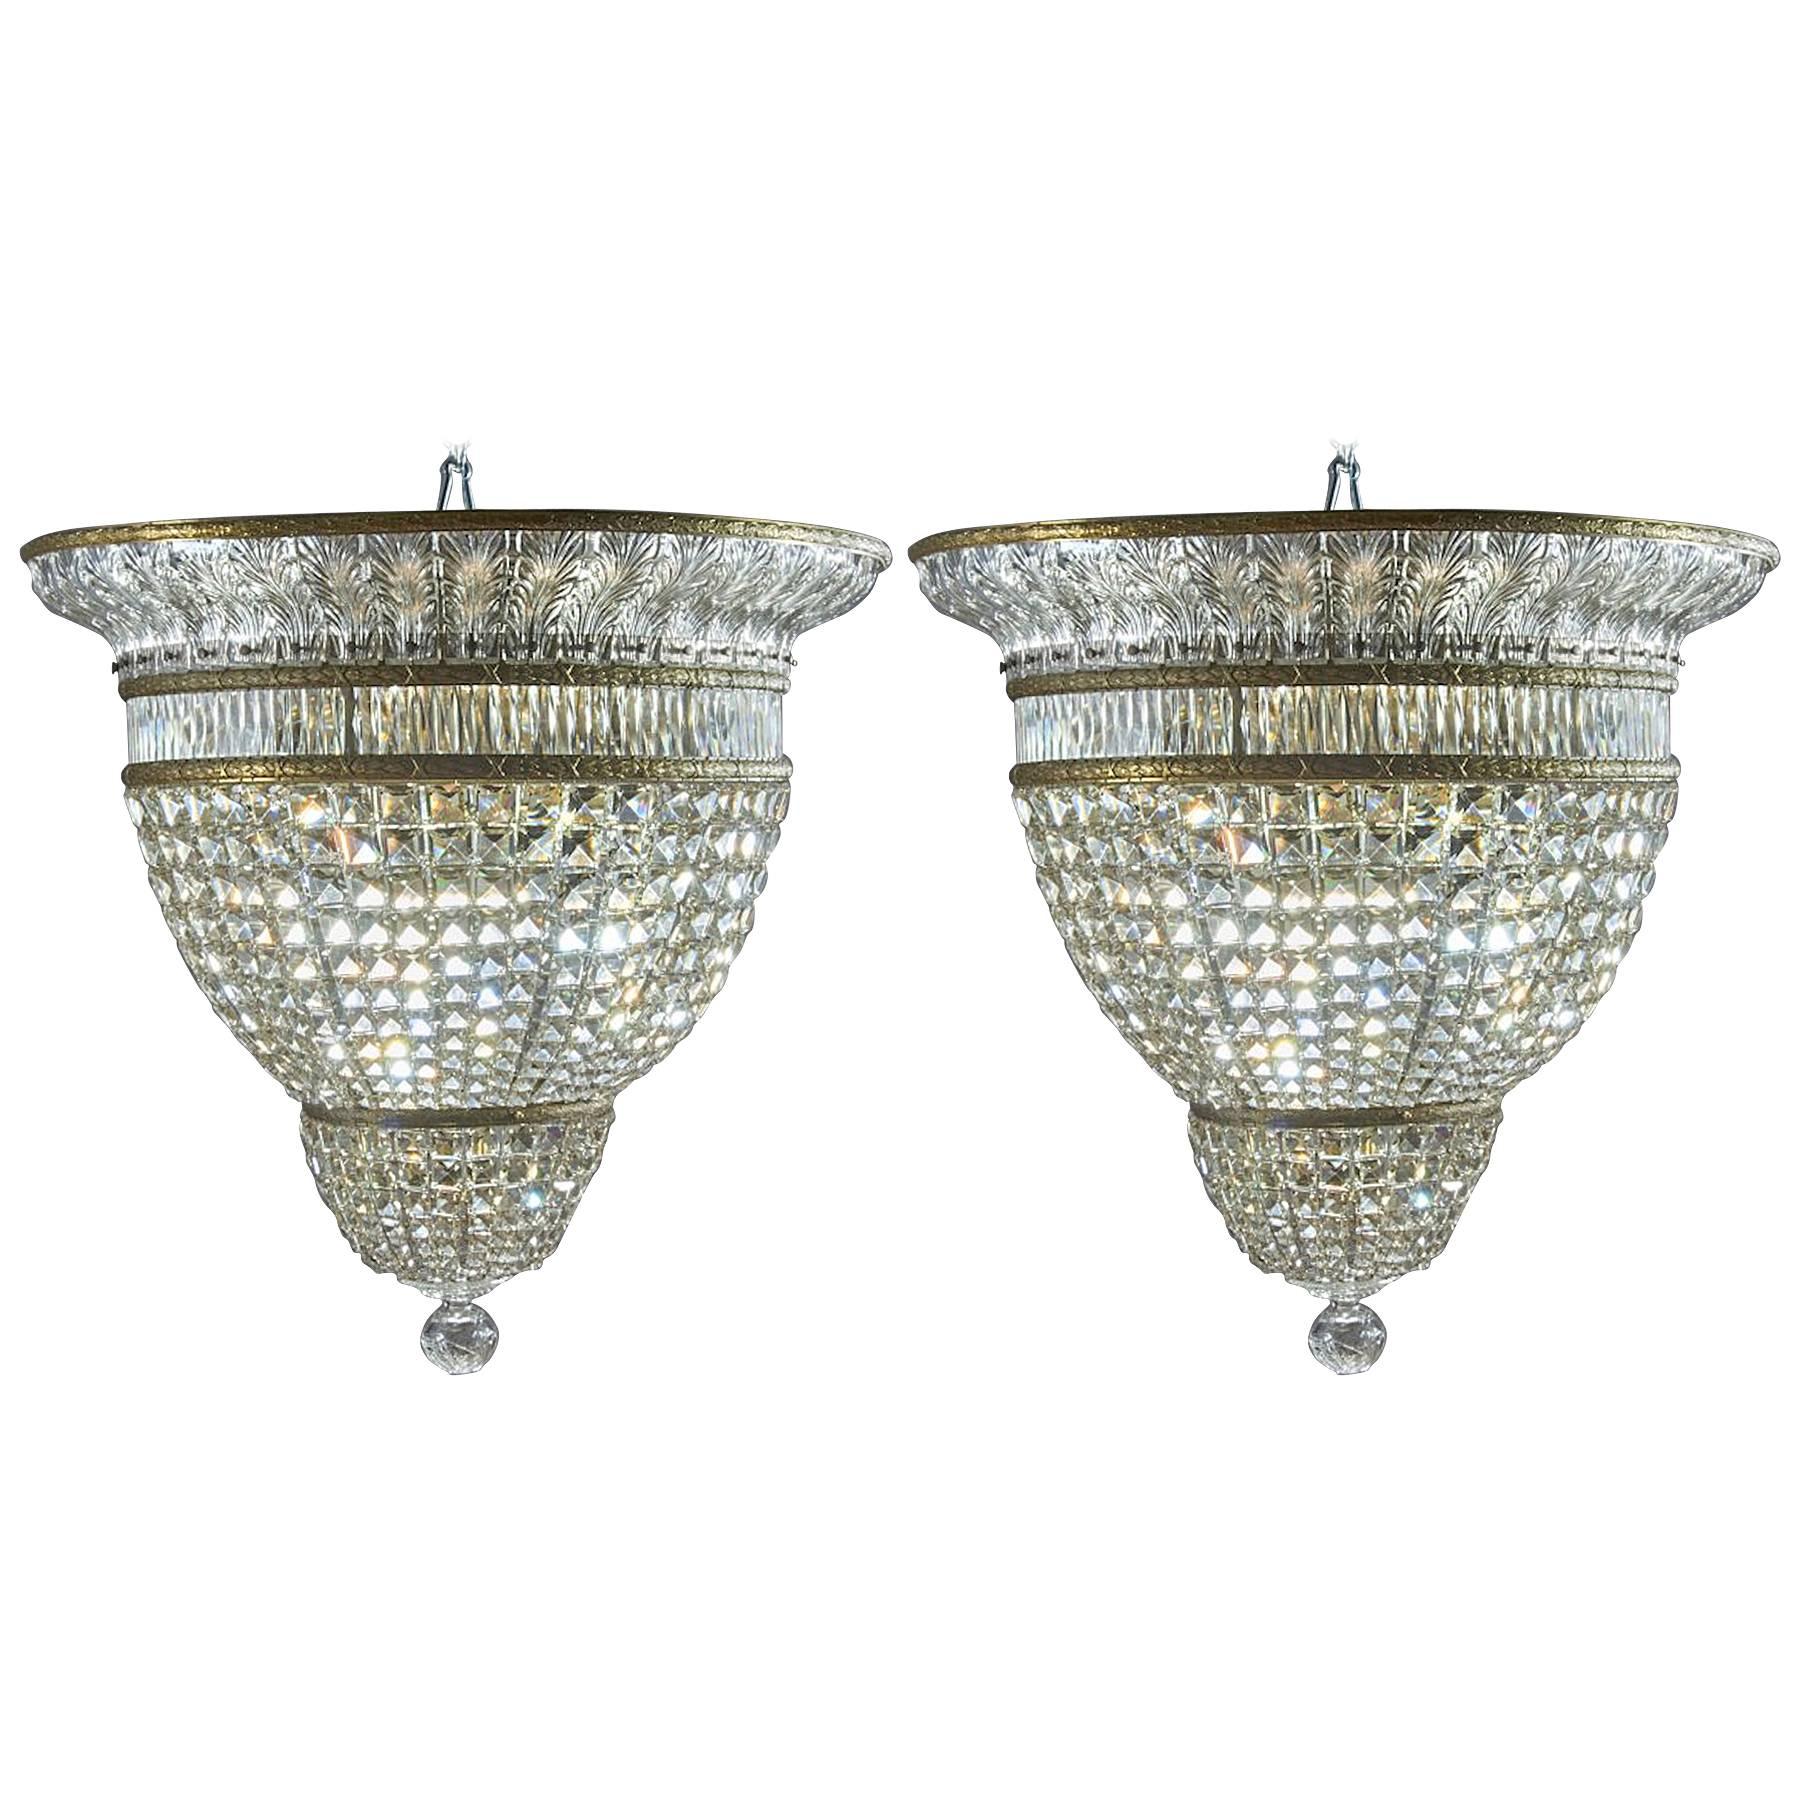 Pair of Large Art Deco Baccarat Plafonniers